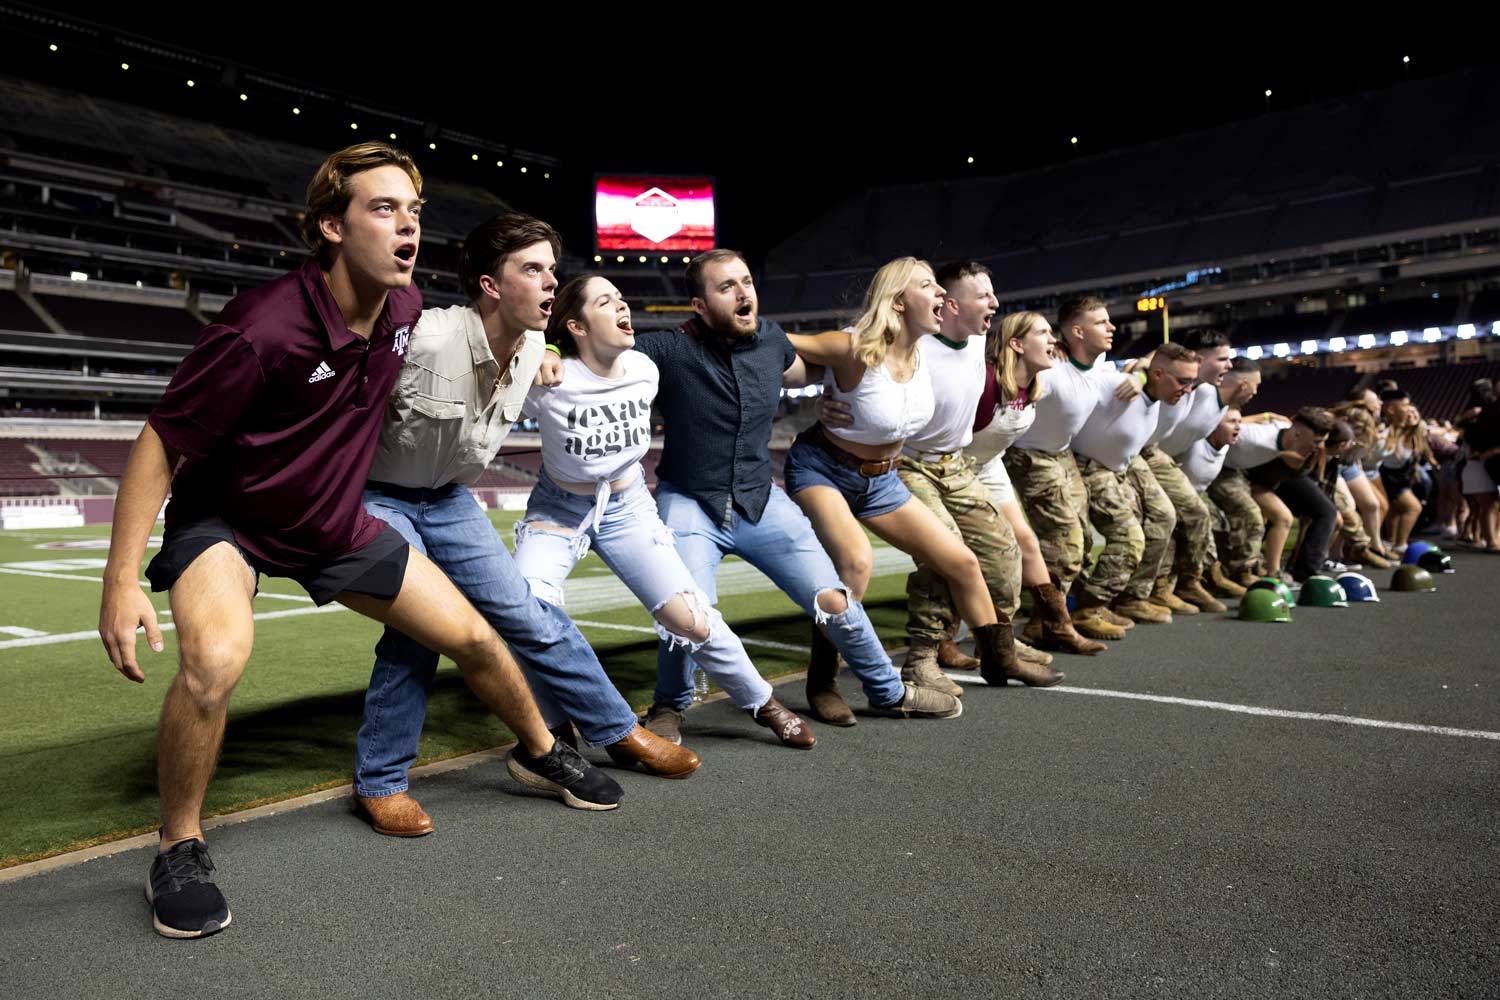 Aggie students saw 'em off during the War Hymn